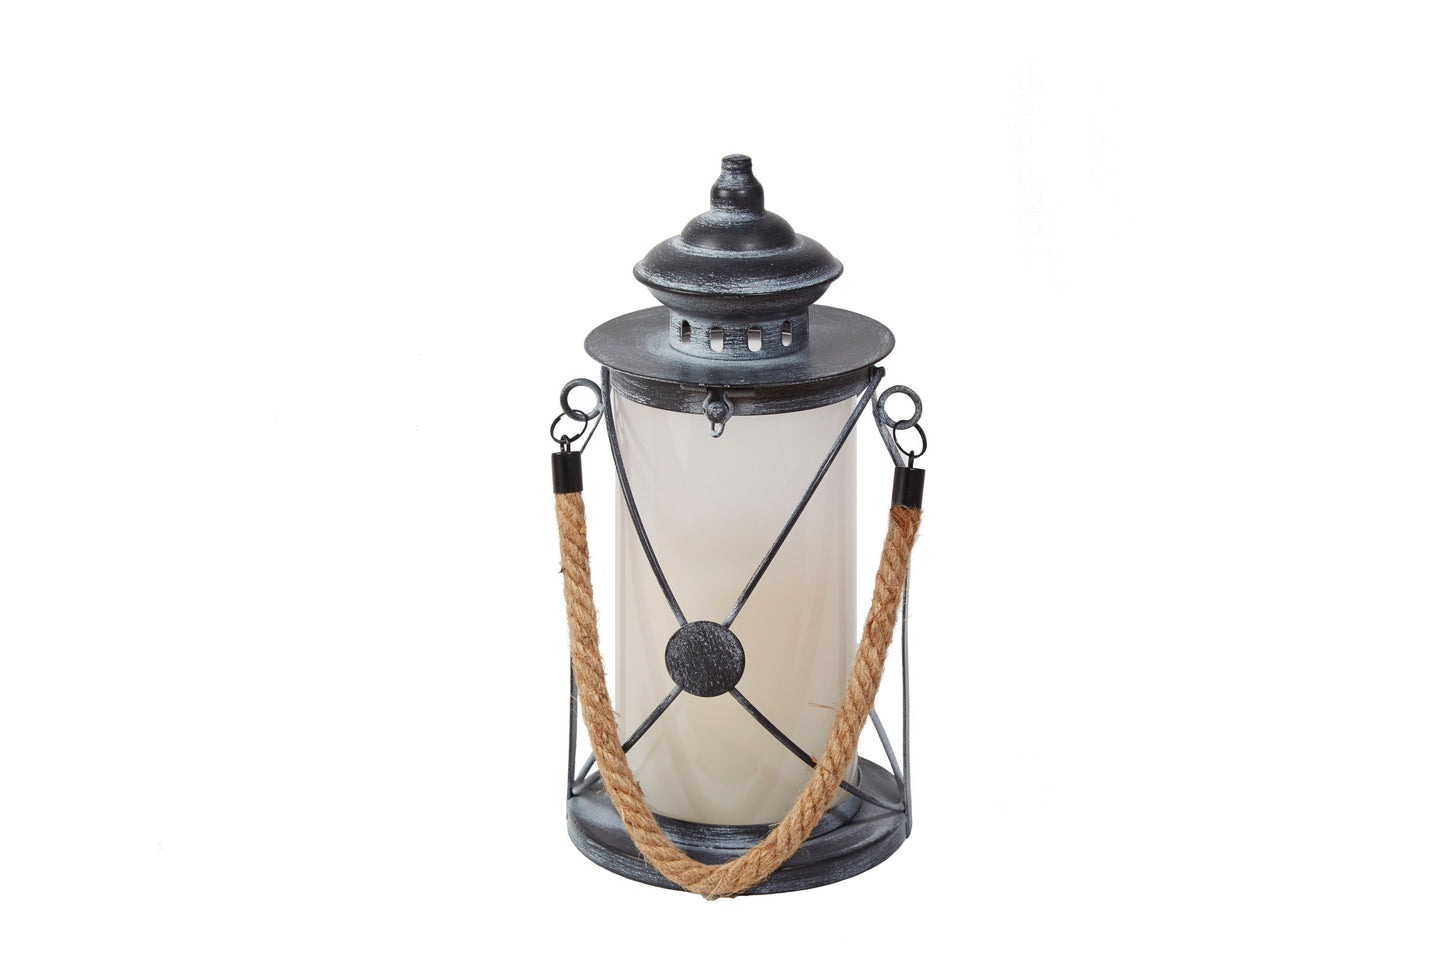 Walden Candle Lantern with Dancing LED Flame